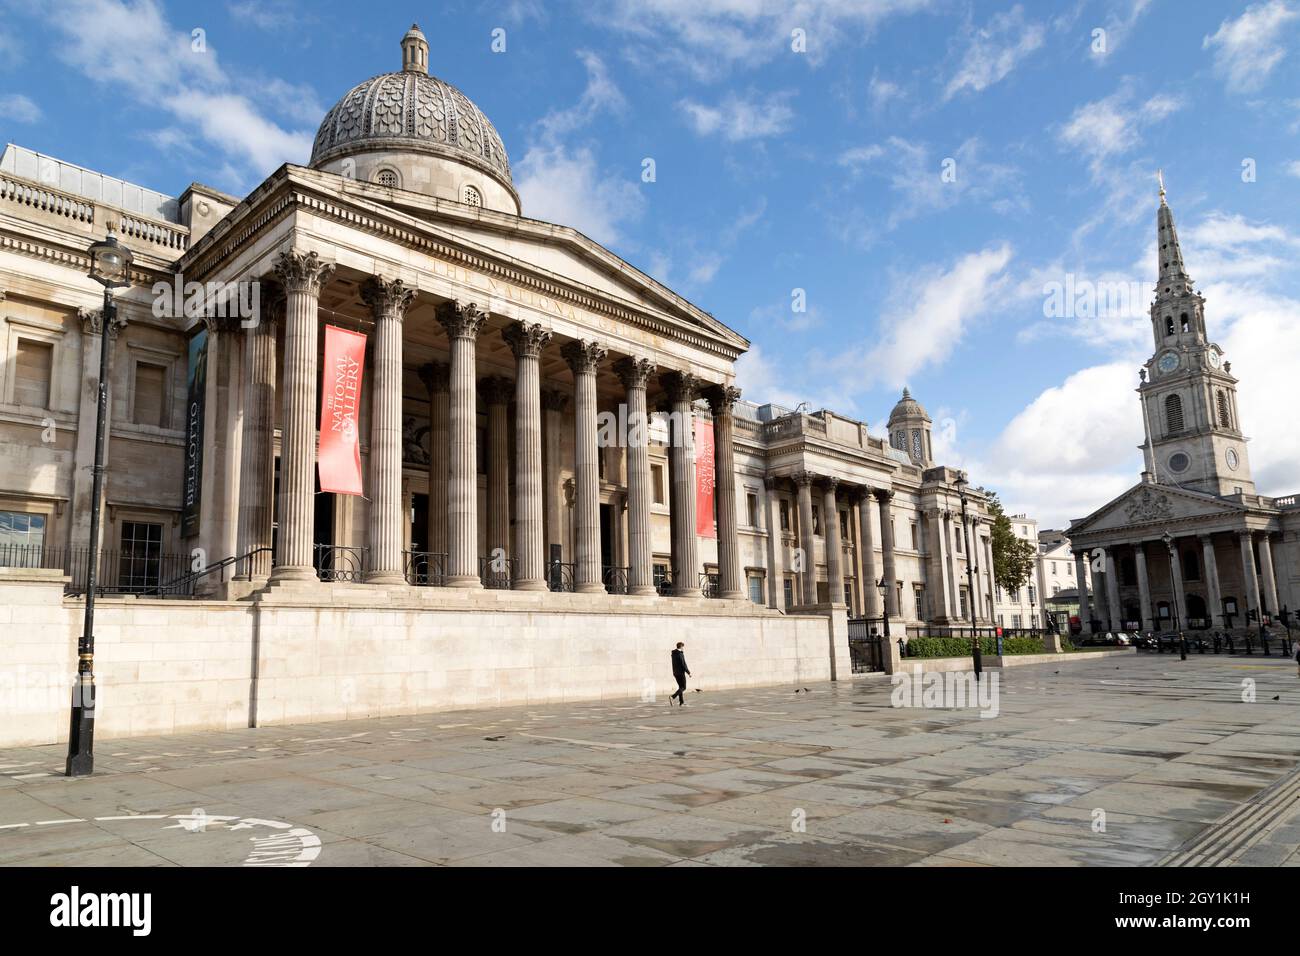 The National Gallery at Trafalgar Square in London, England. The Neoclassical building was designed by William Wilkins and stands across the street fr Stock Photo